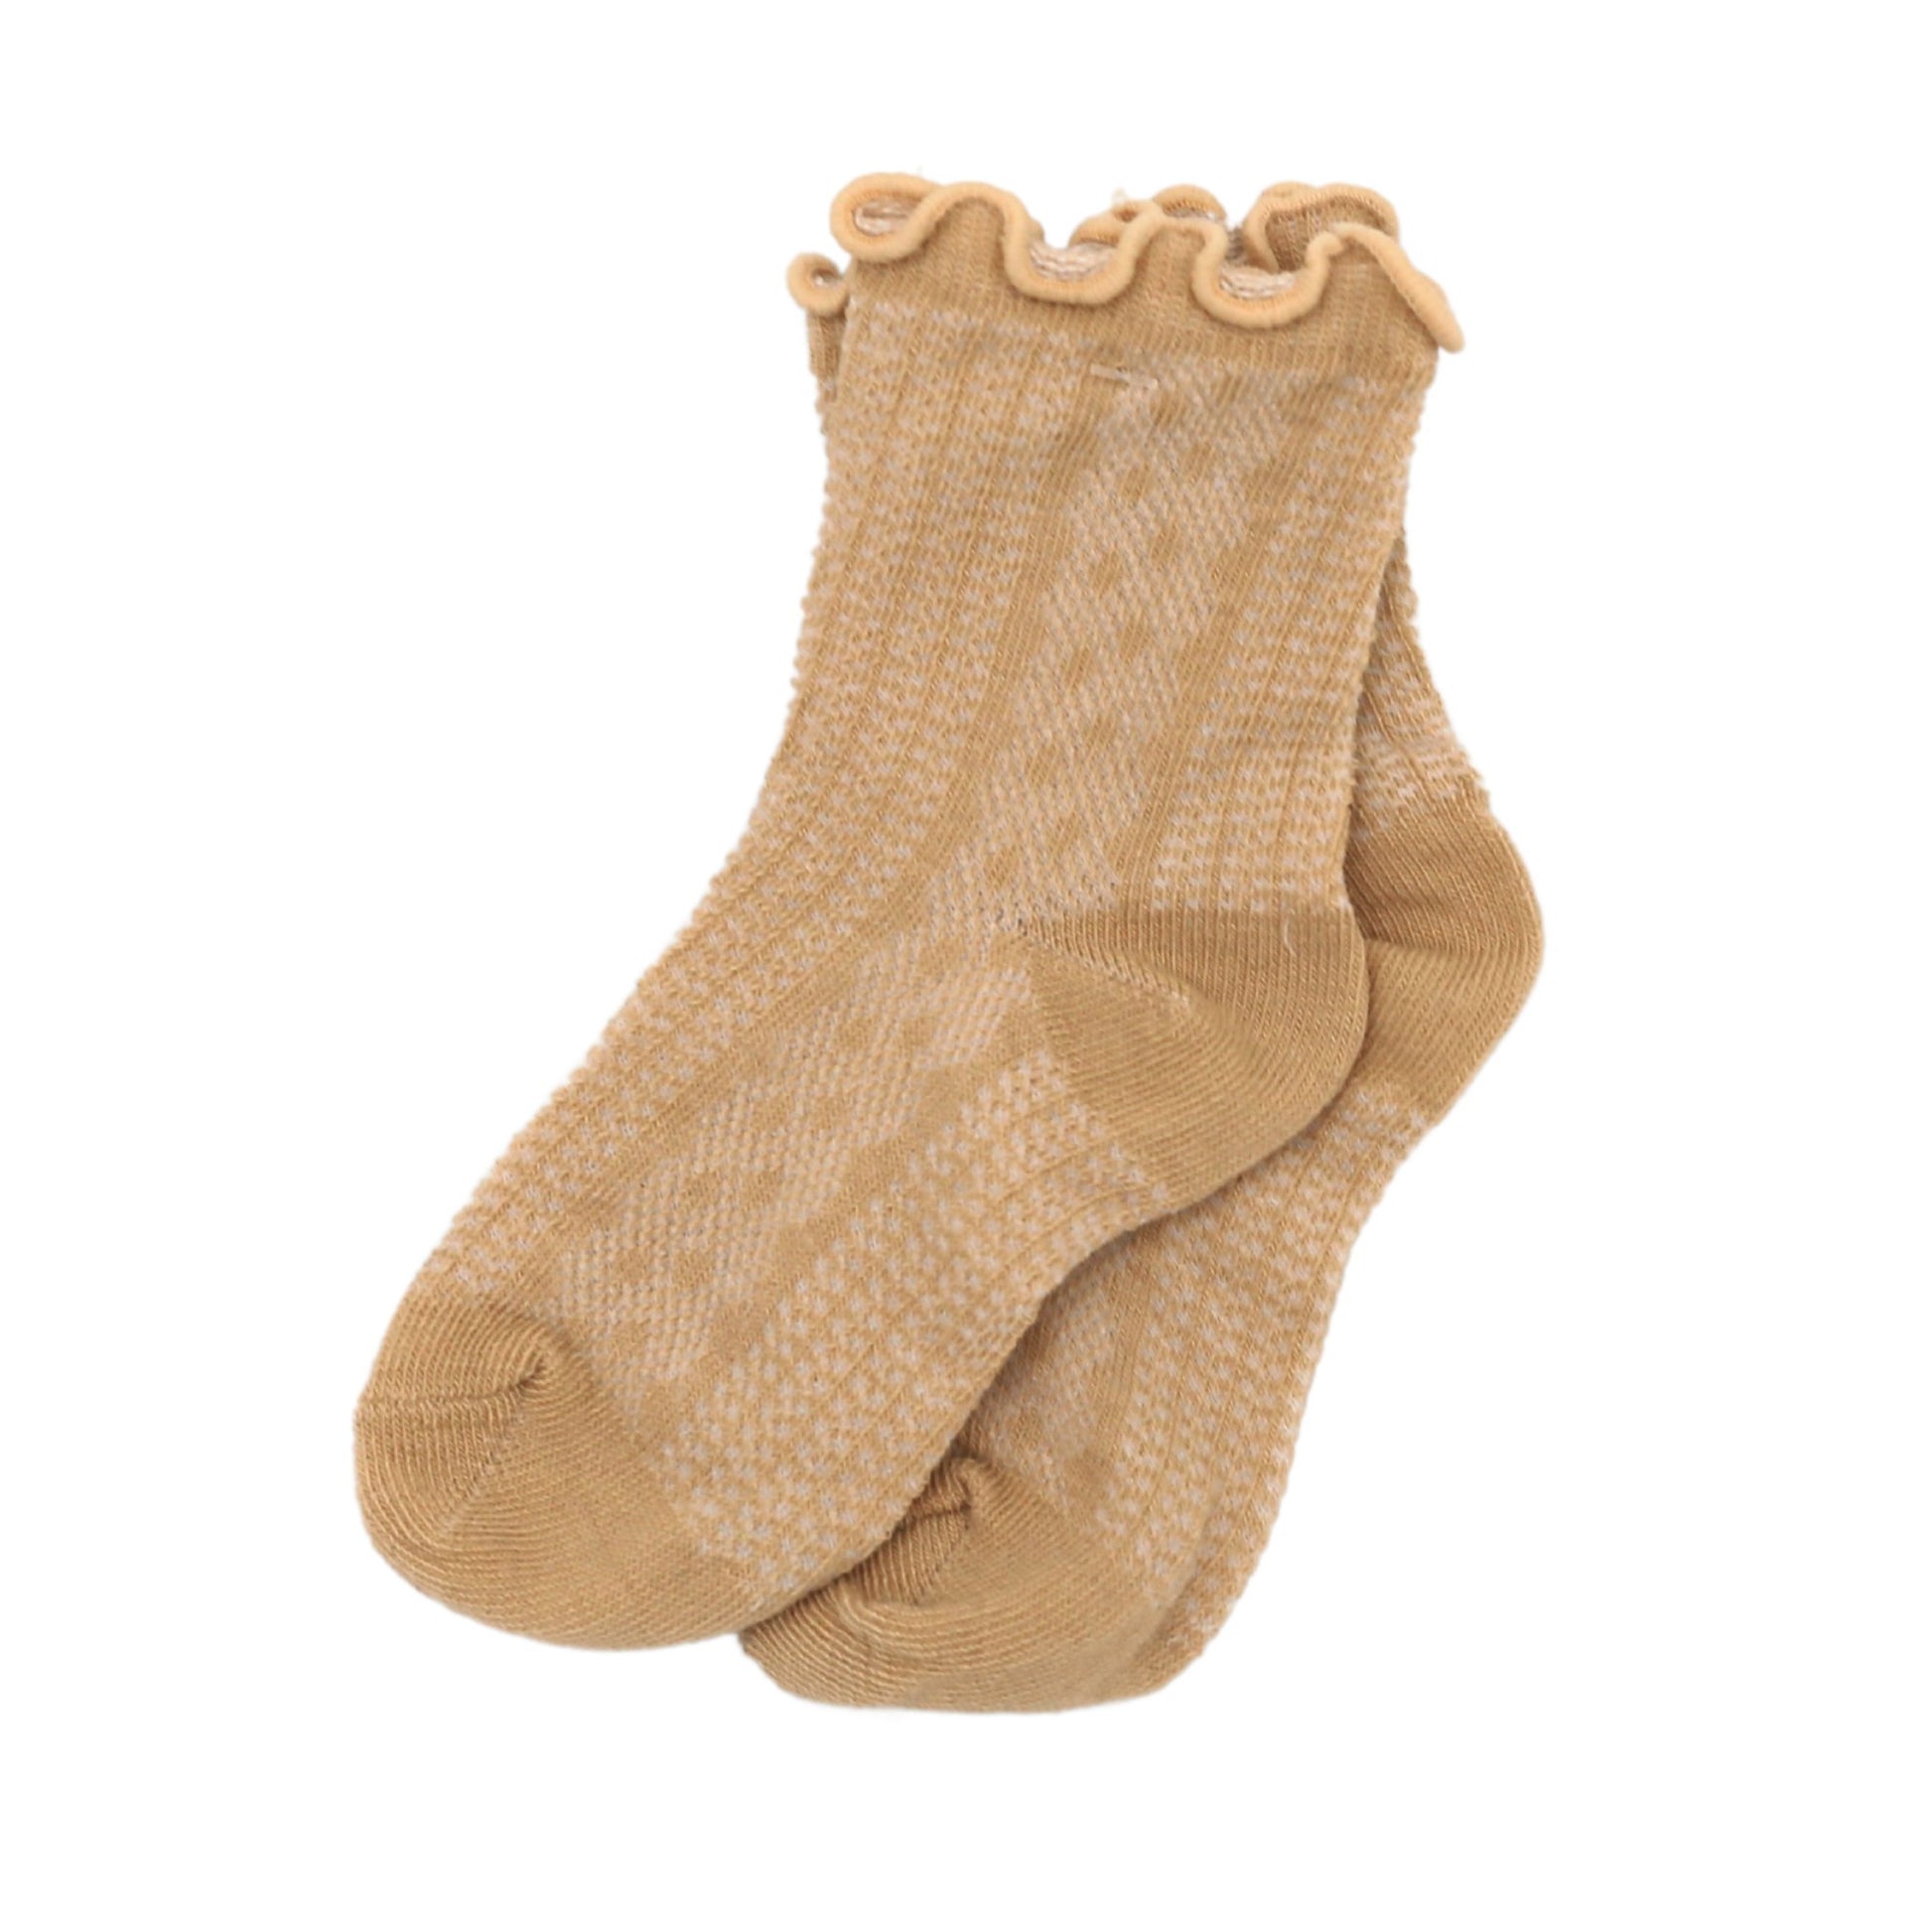 Baby Cubby Patterned Scallop Rib Socks - Beige